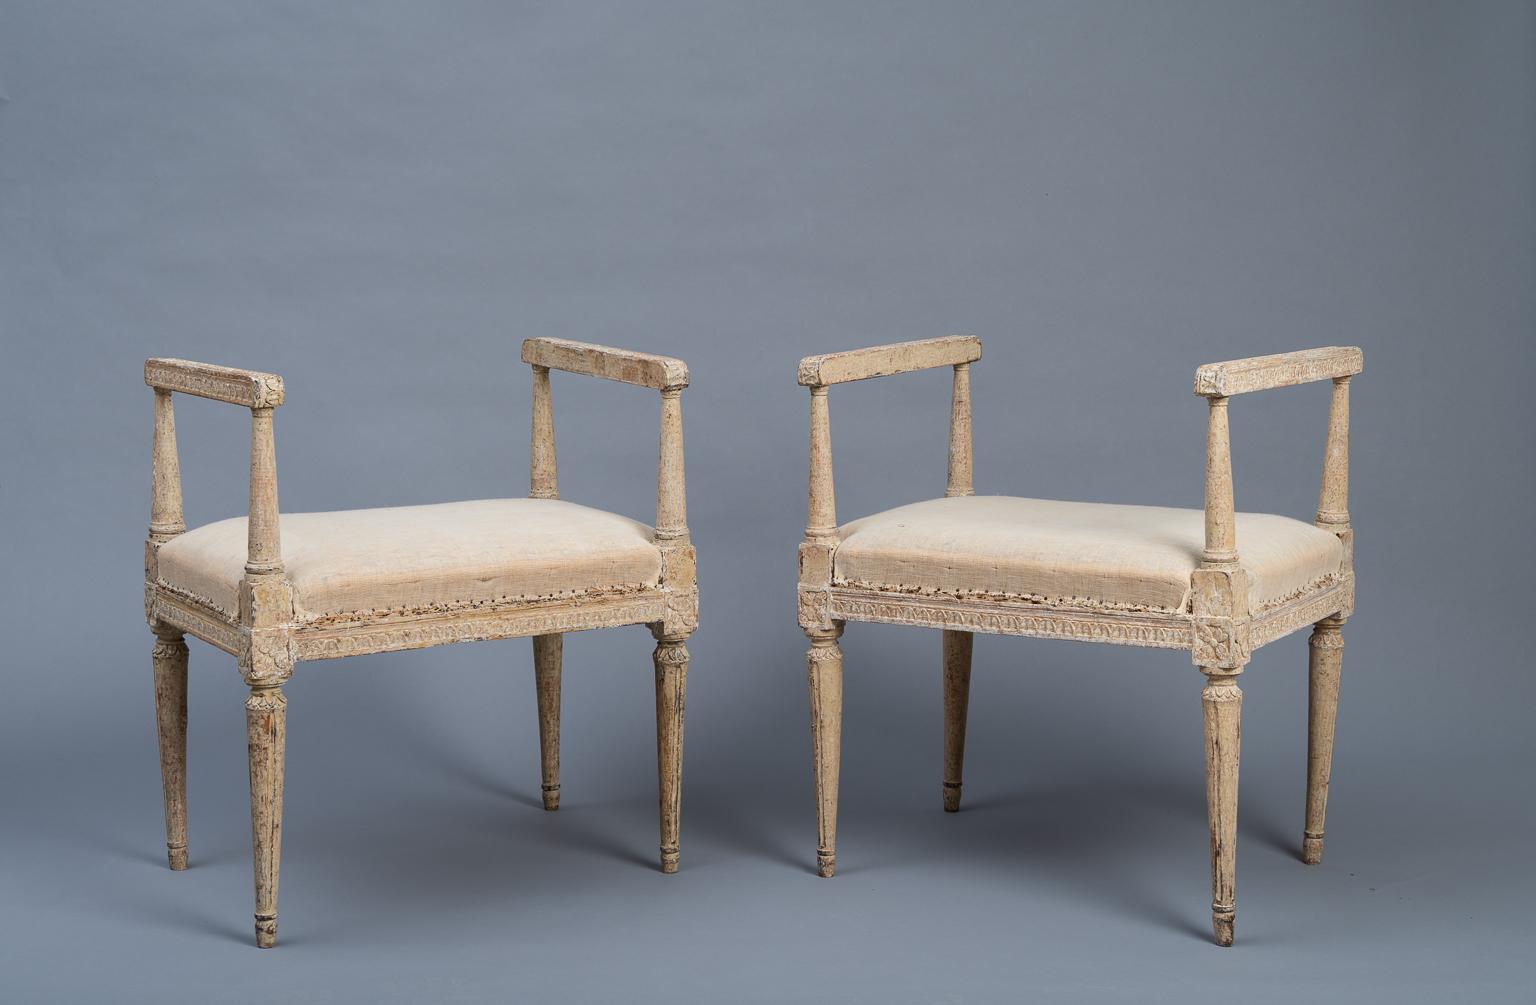 18th Century Two Richly Decorated Gustavian Banquettes Manufactured, 1780